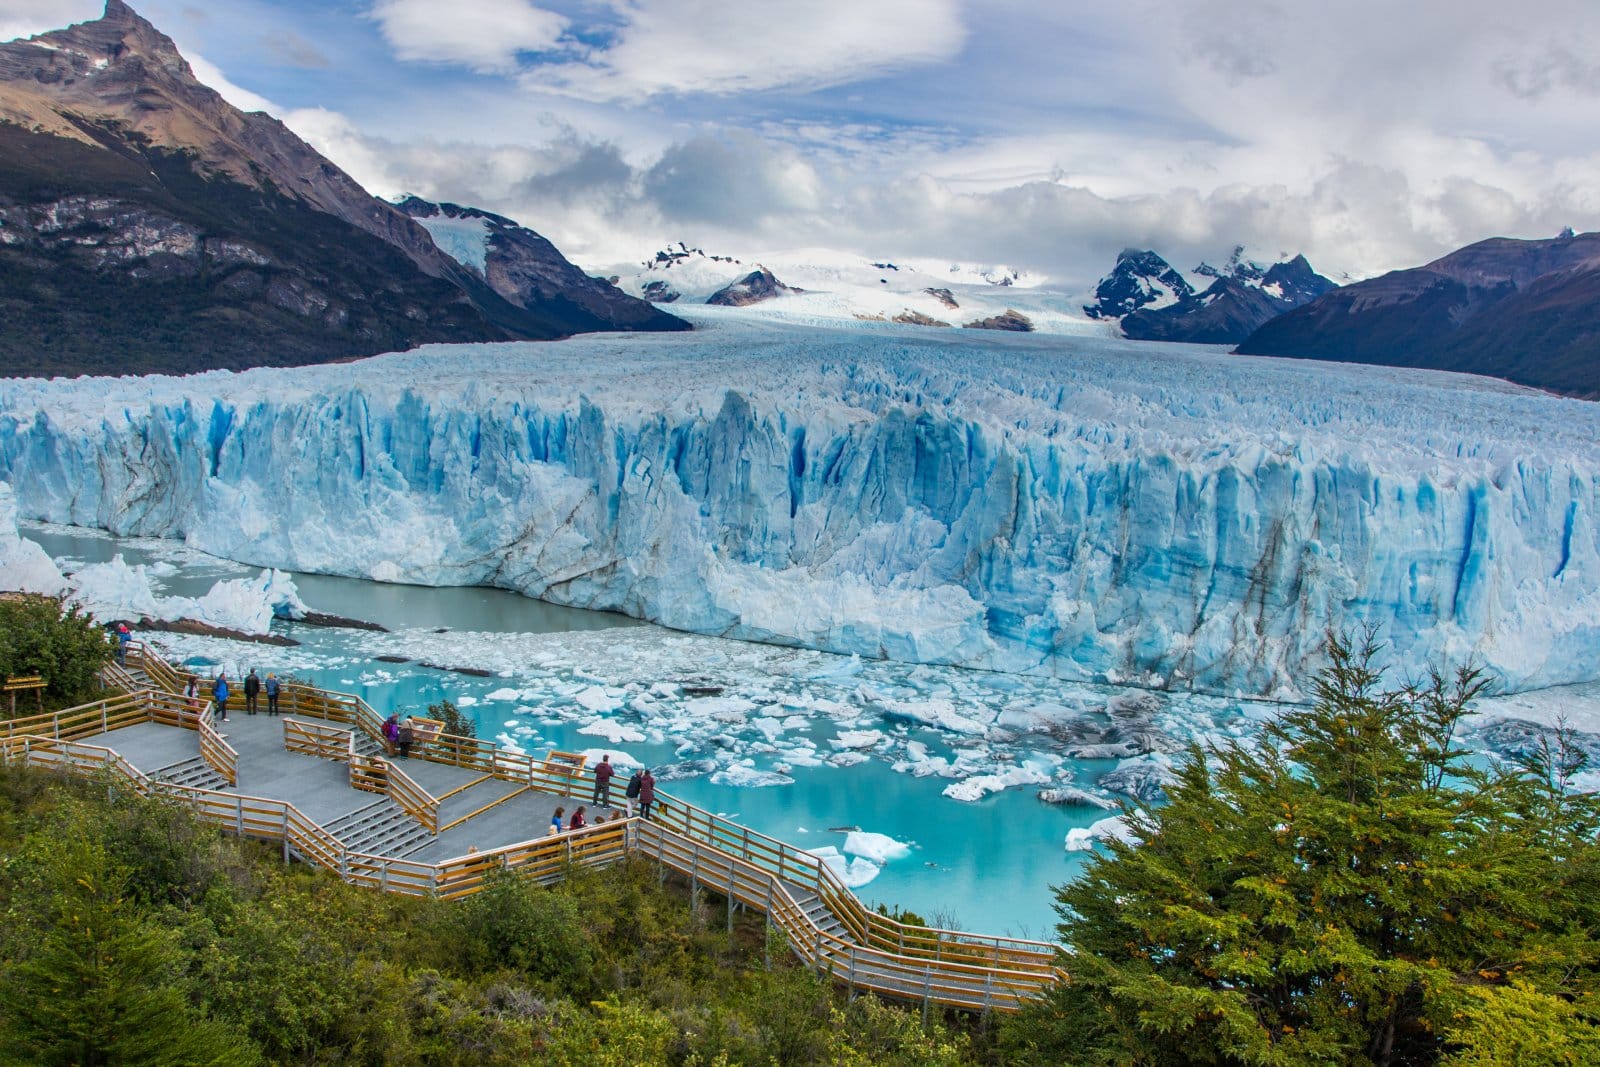 <p><span>El Calafate, the gateway to the Los Glaciares National Park, offers sustainable tourism opportunities with minimal environmental impact. Witness the stunning Perito Moreno Glacier and participate in eco-friendly glacier treks and boat tours.</span></p> <p><b>Insider’s Tip: </b><span>Opt for a mini-trekking experience on the glacier with expert guides. </span></p> <p><b>When to Travel: </b><span>October to April, with glacier trekking most accessible from November to March. </span></p> <p><b>How to Get There: </b><span>Fly to El Calafate and then travel by road to the national park.</span></p>